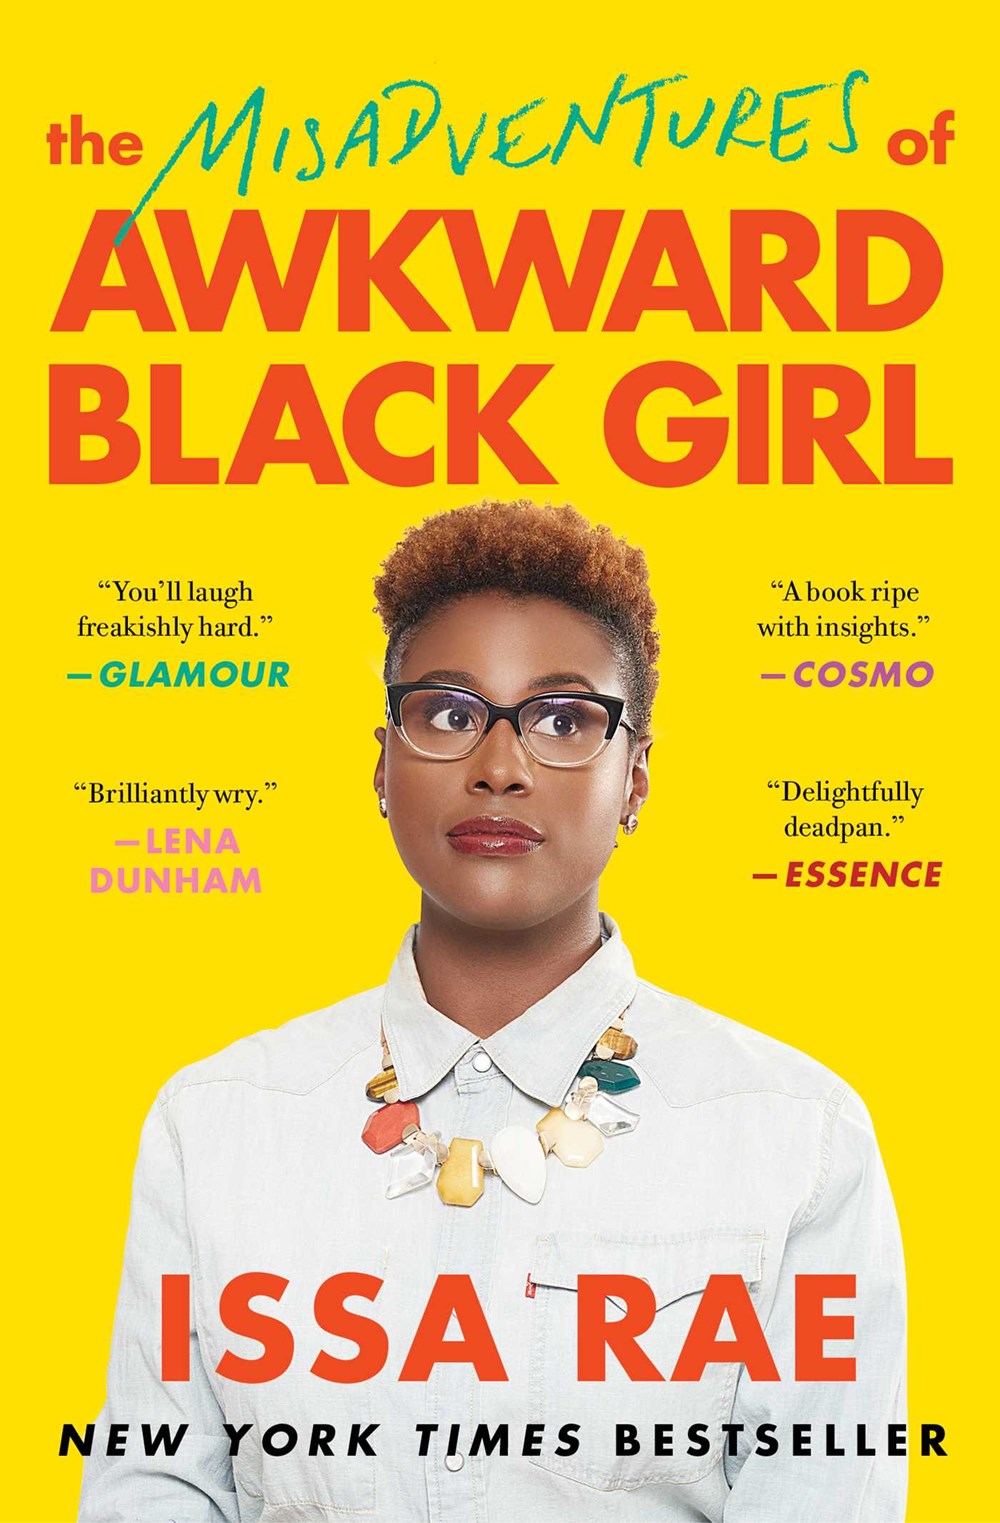 The Misadventures of an Awkward Black Girl by Issa Rae